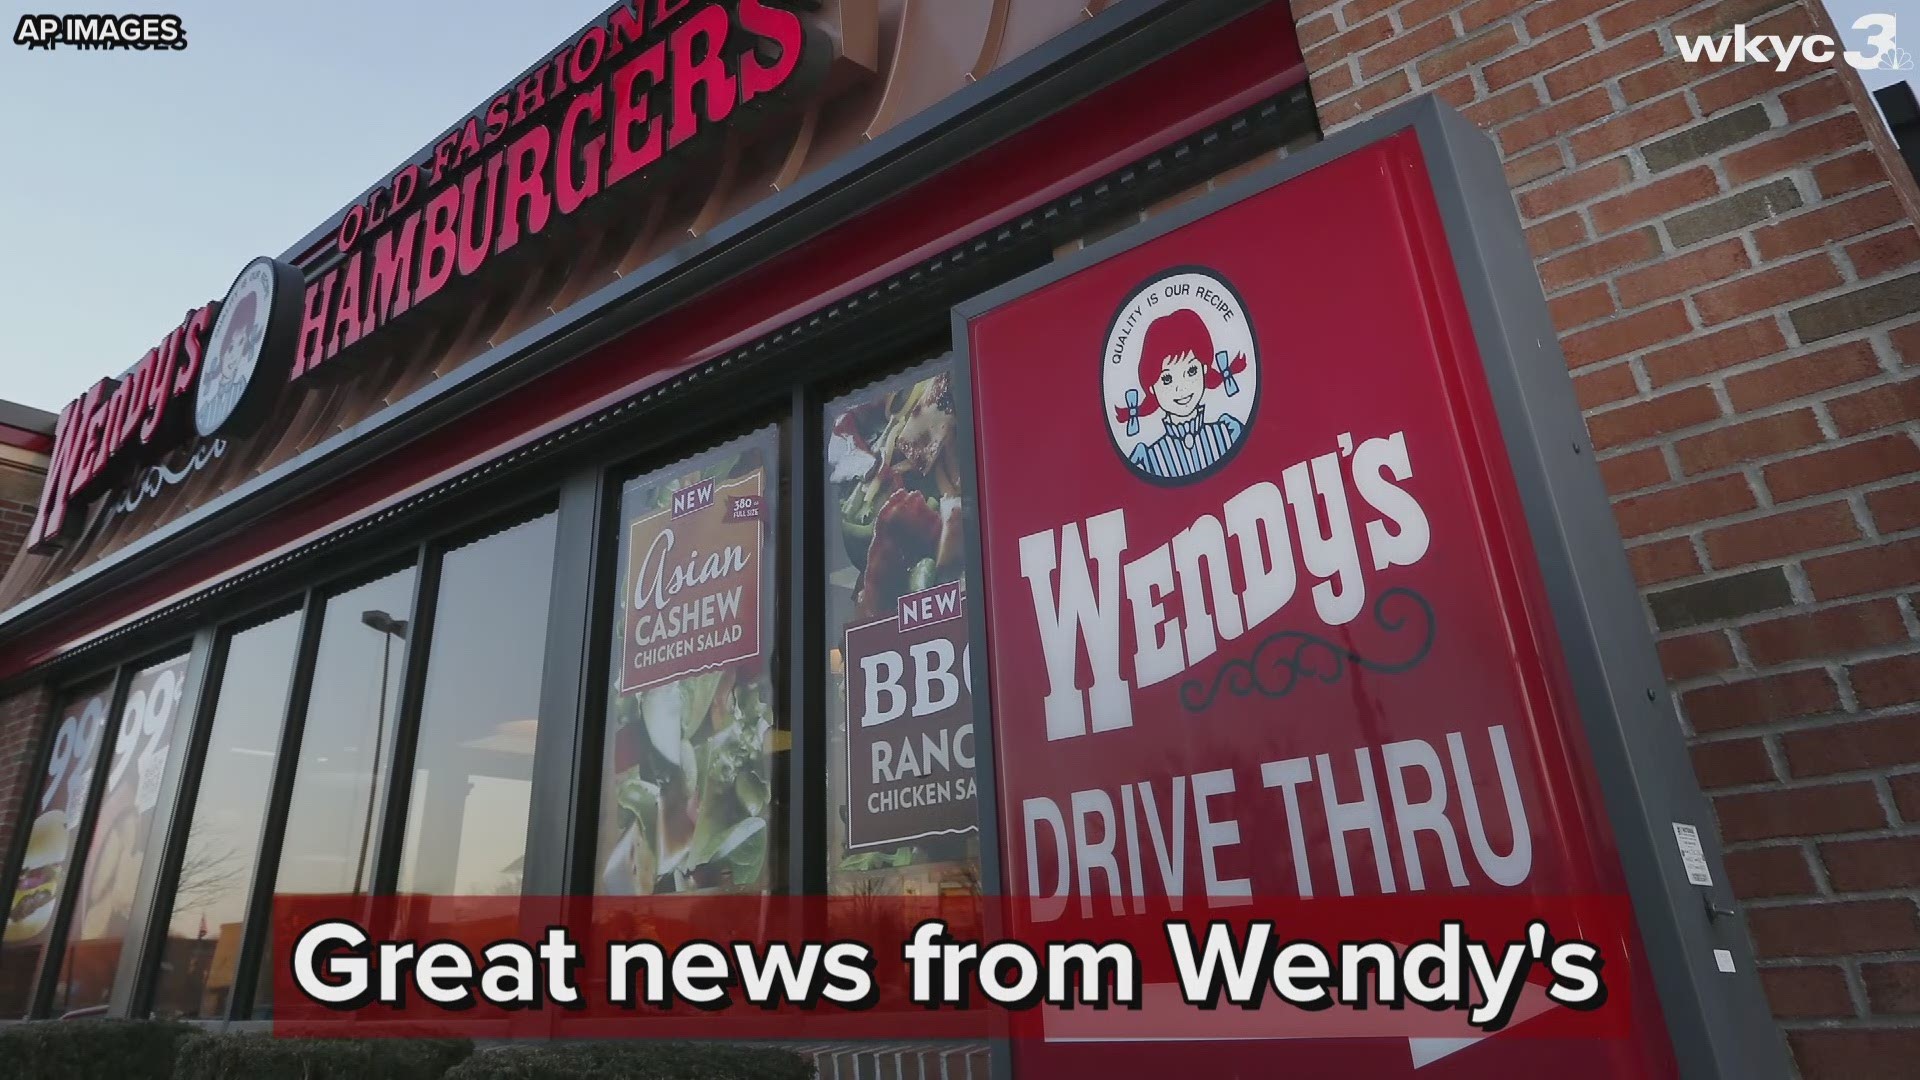 The fast food brand is well-aware of the excitement and seems to be throwing fans a bone. Instead of resurrecting the spicy chicken nuggets on Aug. 19 like originally announced, Wendy's said in a tweet Thursday that the nuggets will now return this Monday.